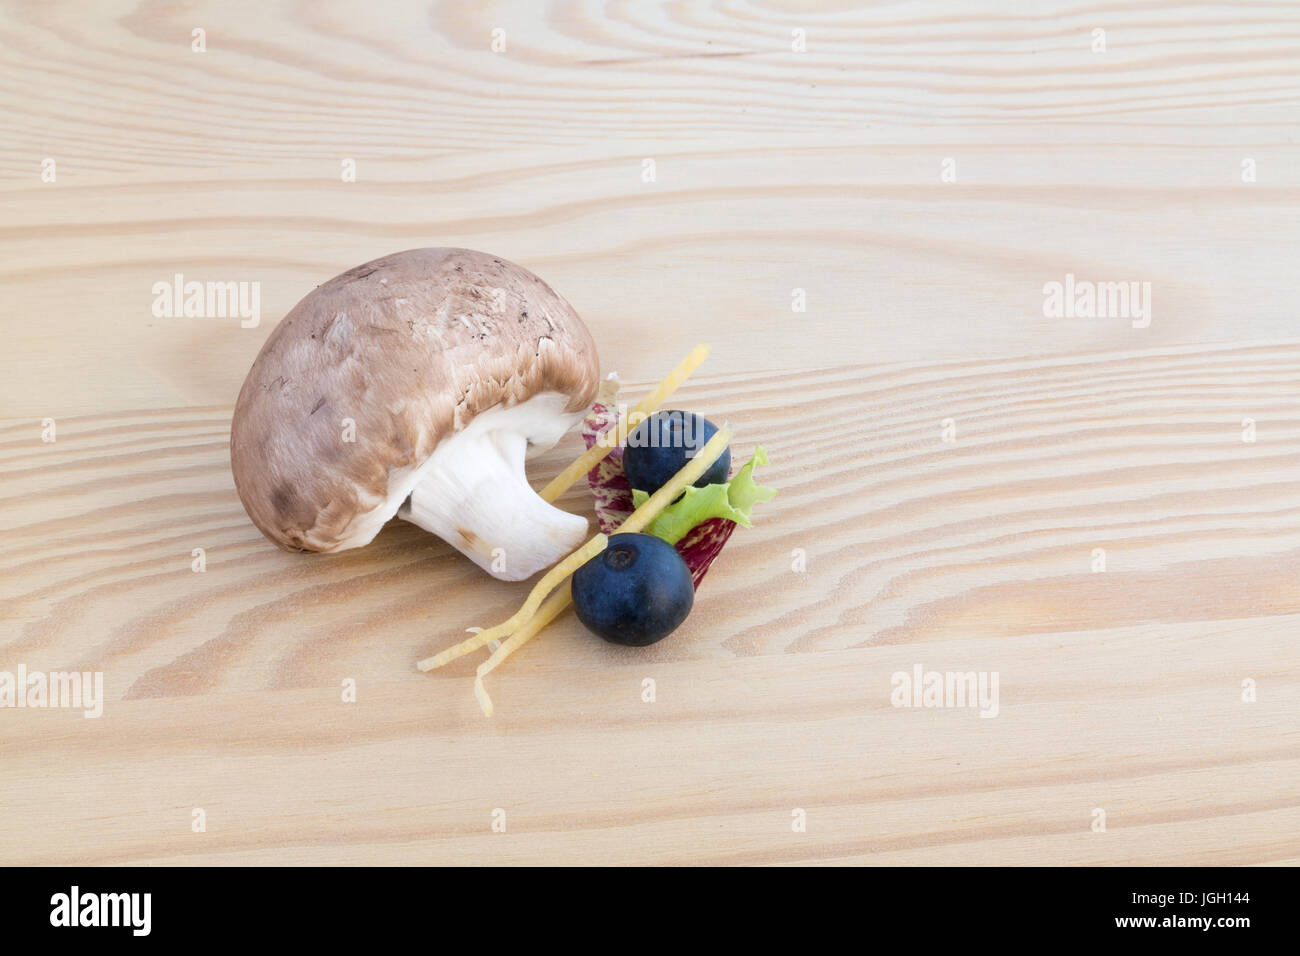 Chestnut mushroom, two blueberries and lettuce leaf on wooden cutting board Stock Photo